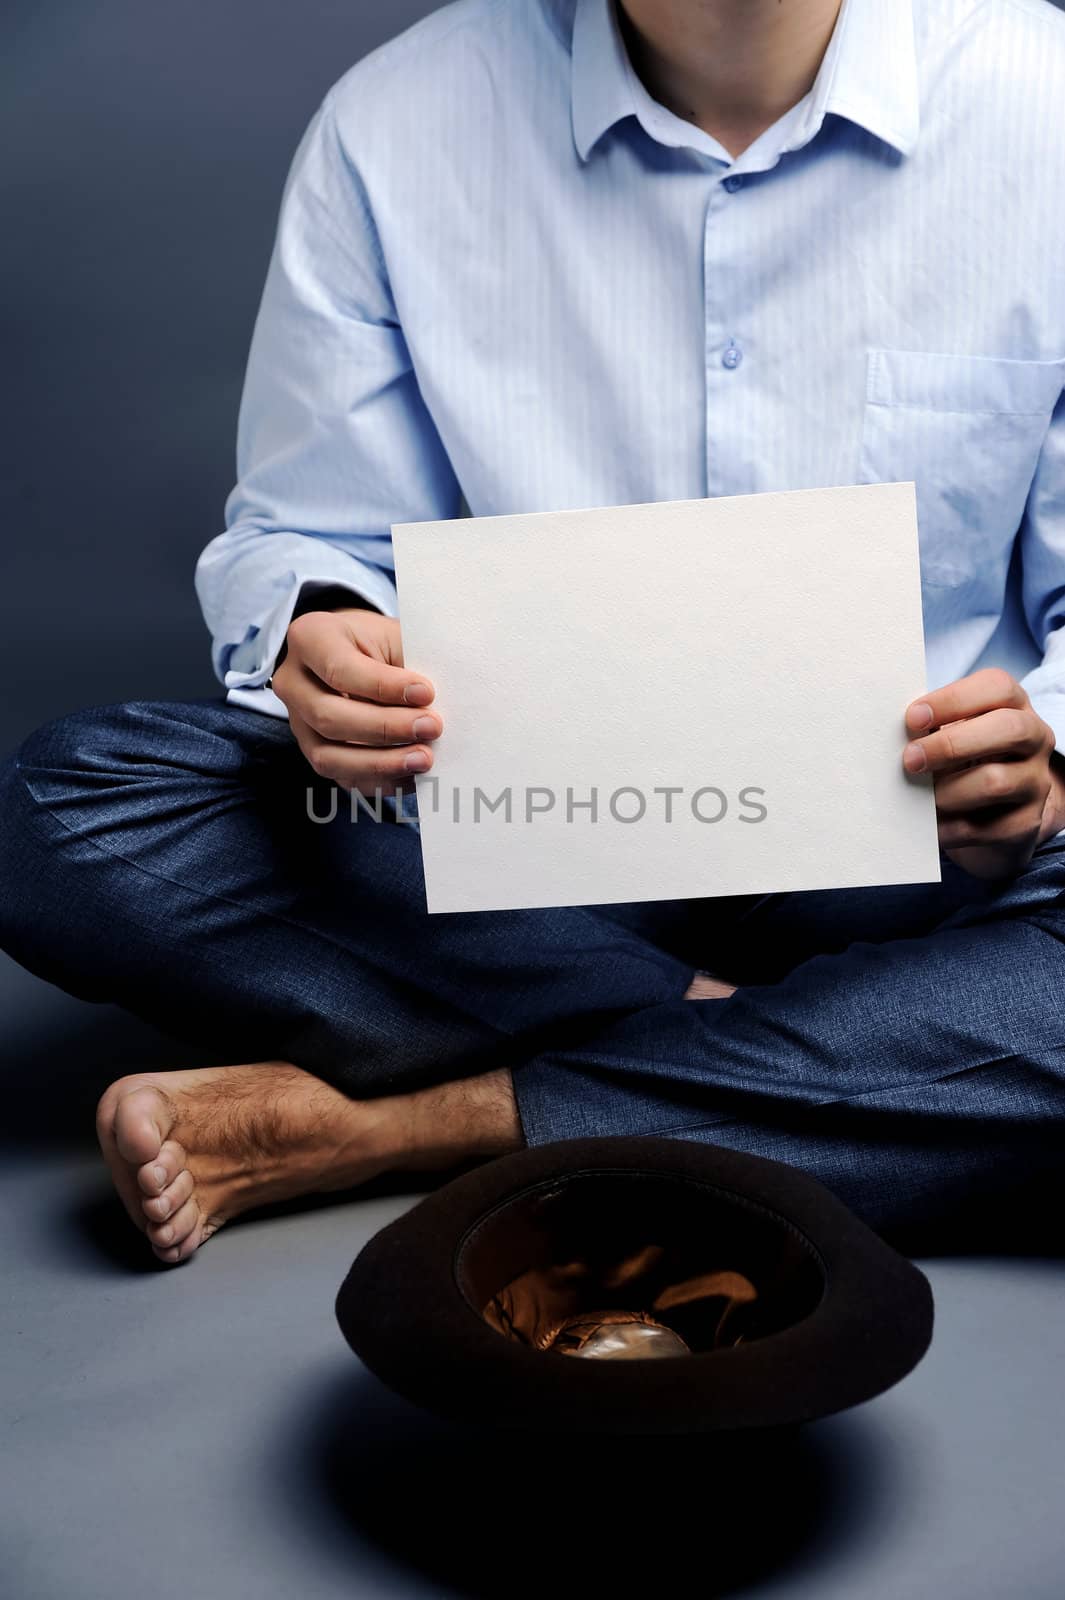 An image of a beggar with a hat and a blank sheet of paper